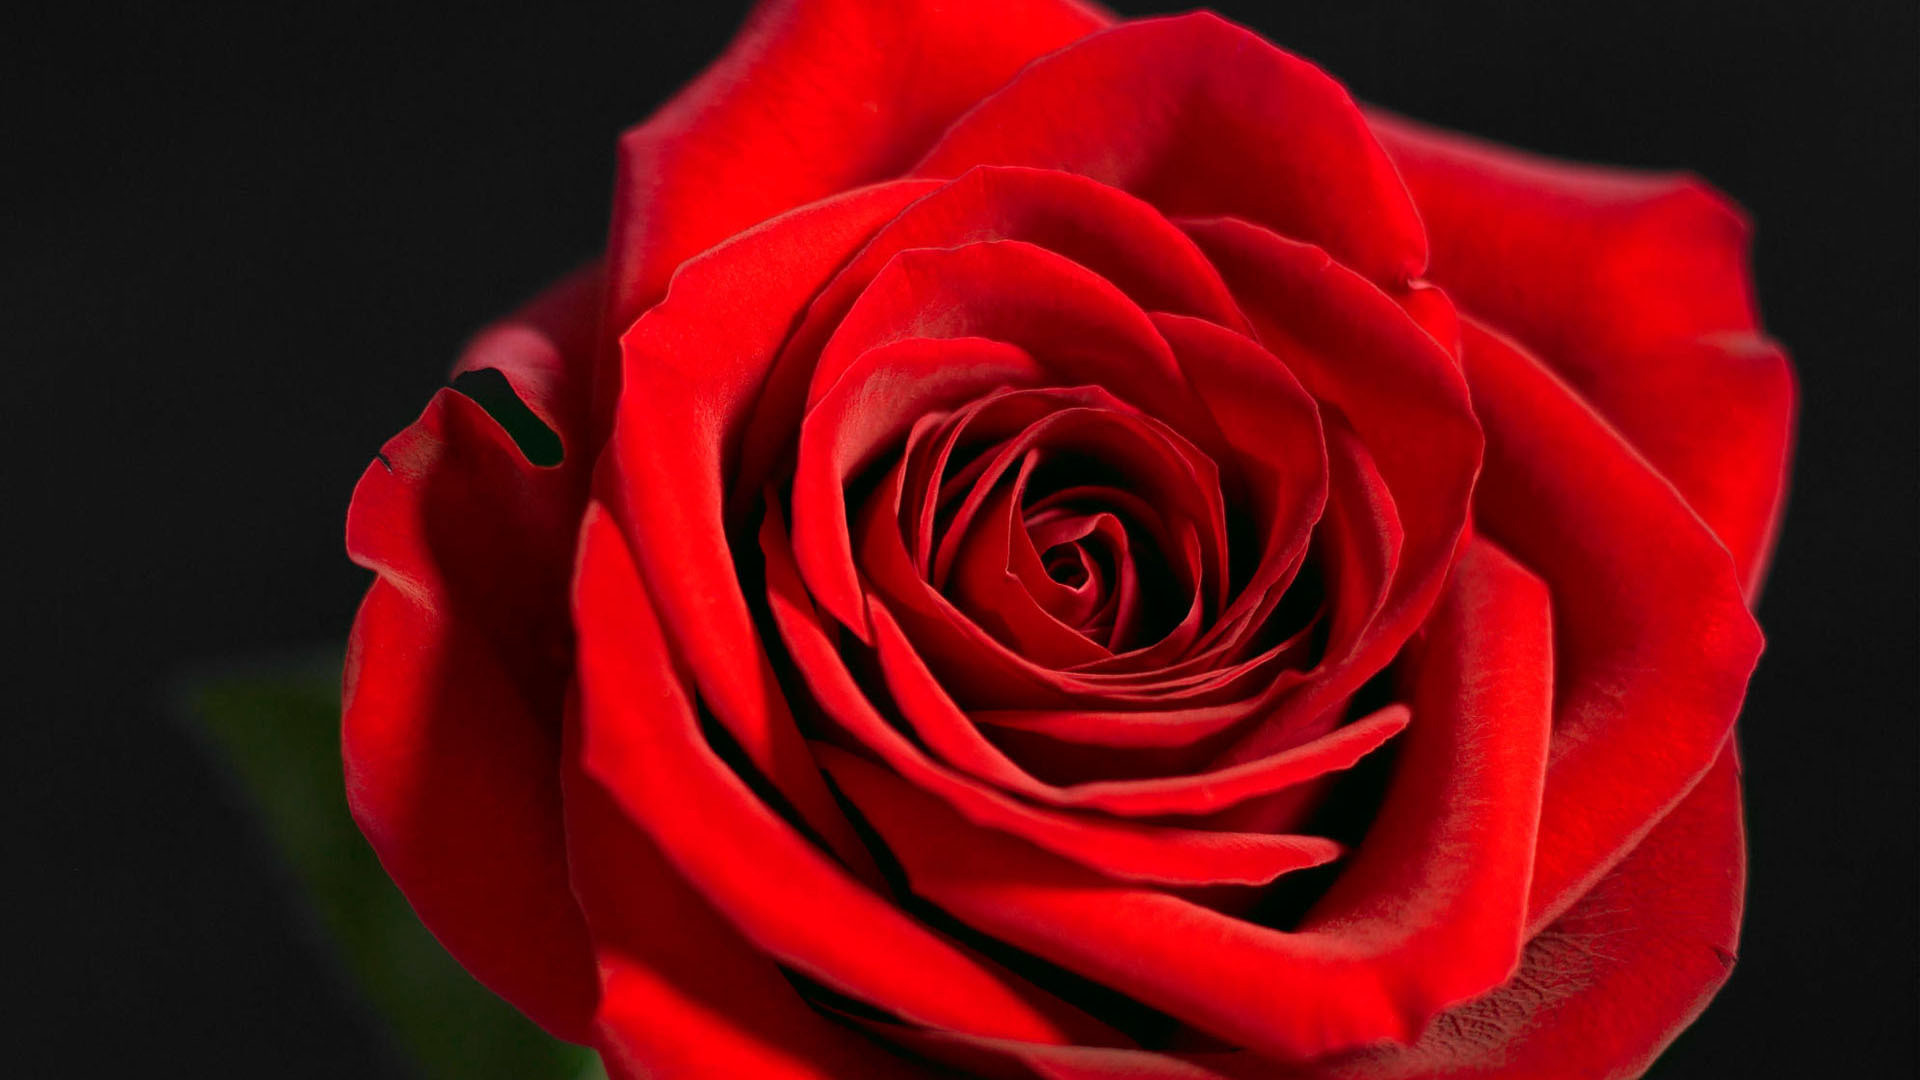 1920x1080 Beautiful red rose on a black background closeup wallpapers and images .